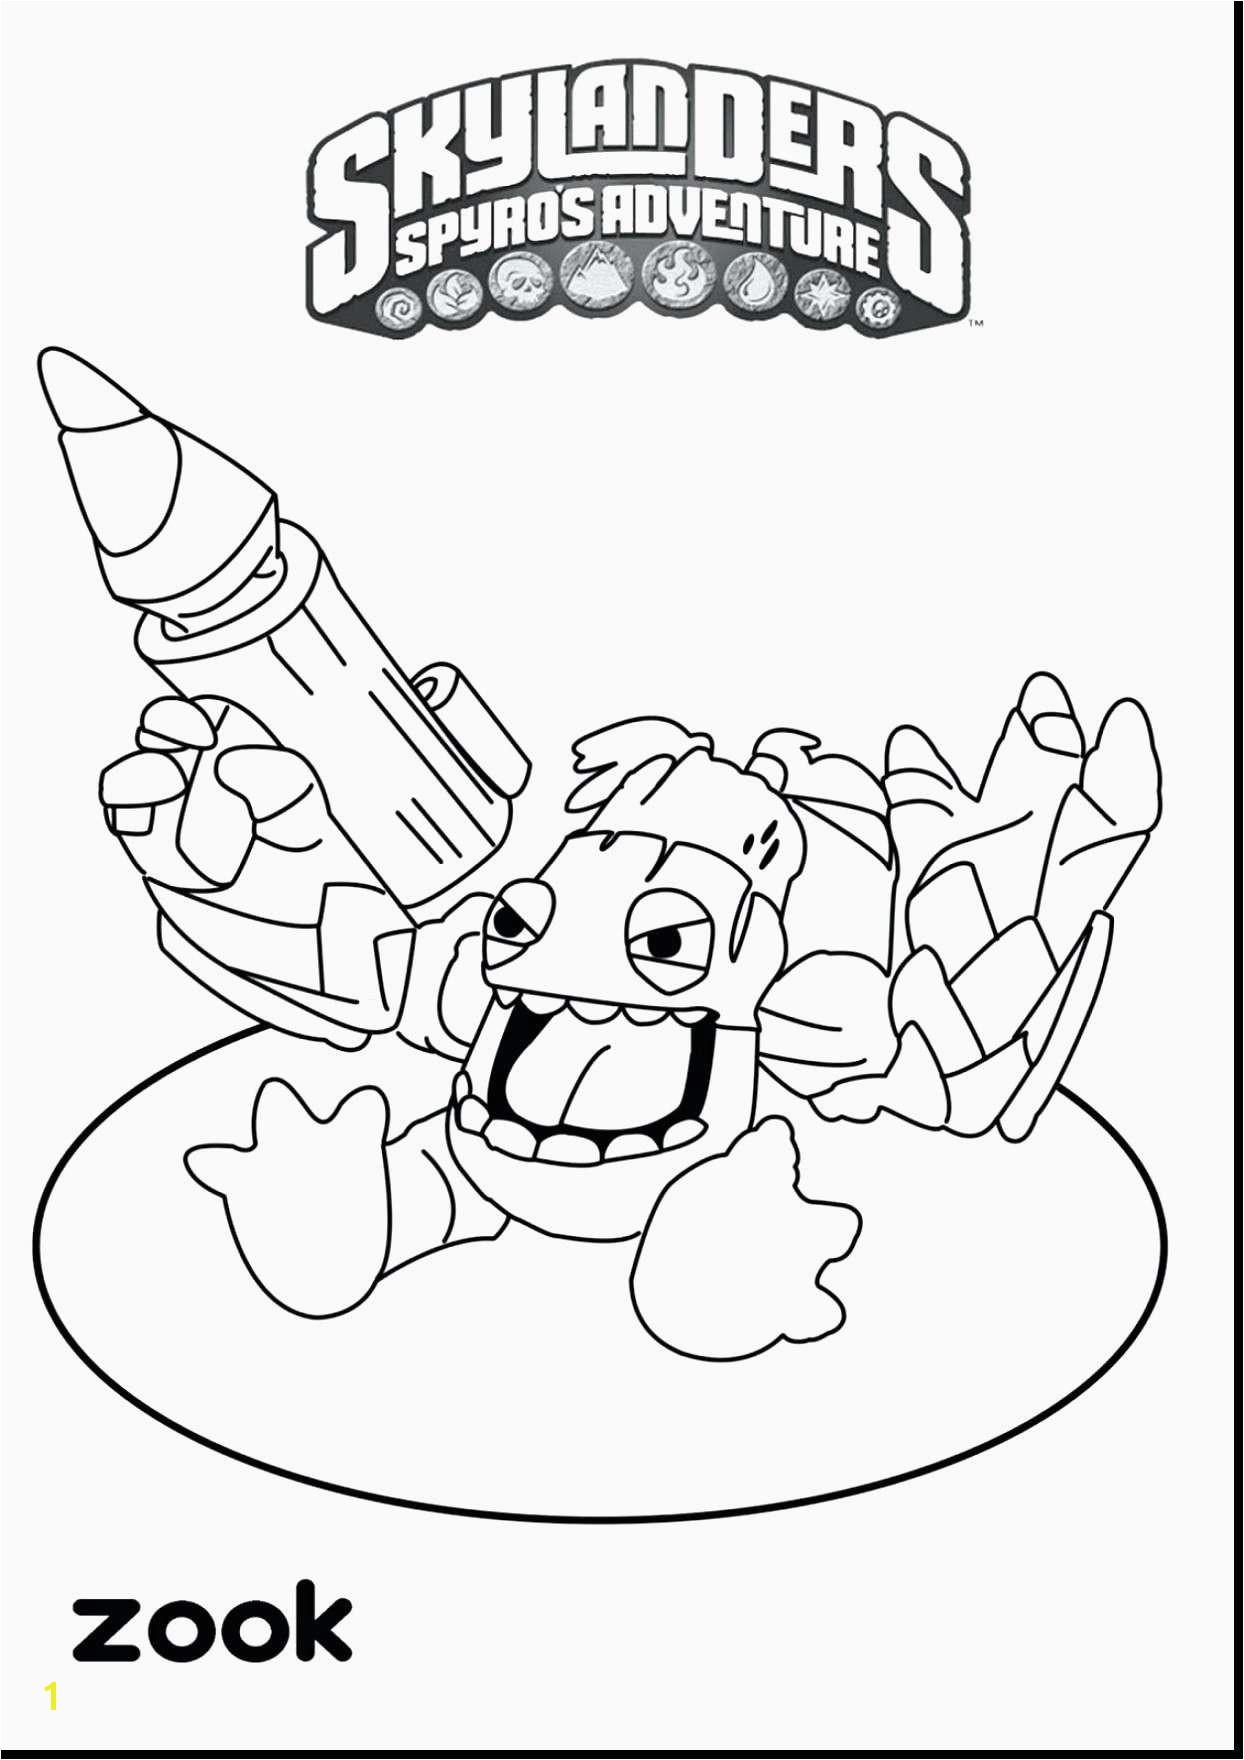 Lego Printable Coloring Pages 38 Coloring Pages for Boys Lego Ninjago Printable